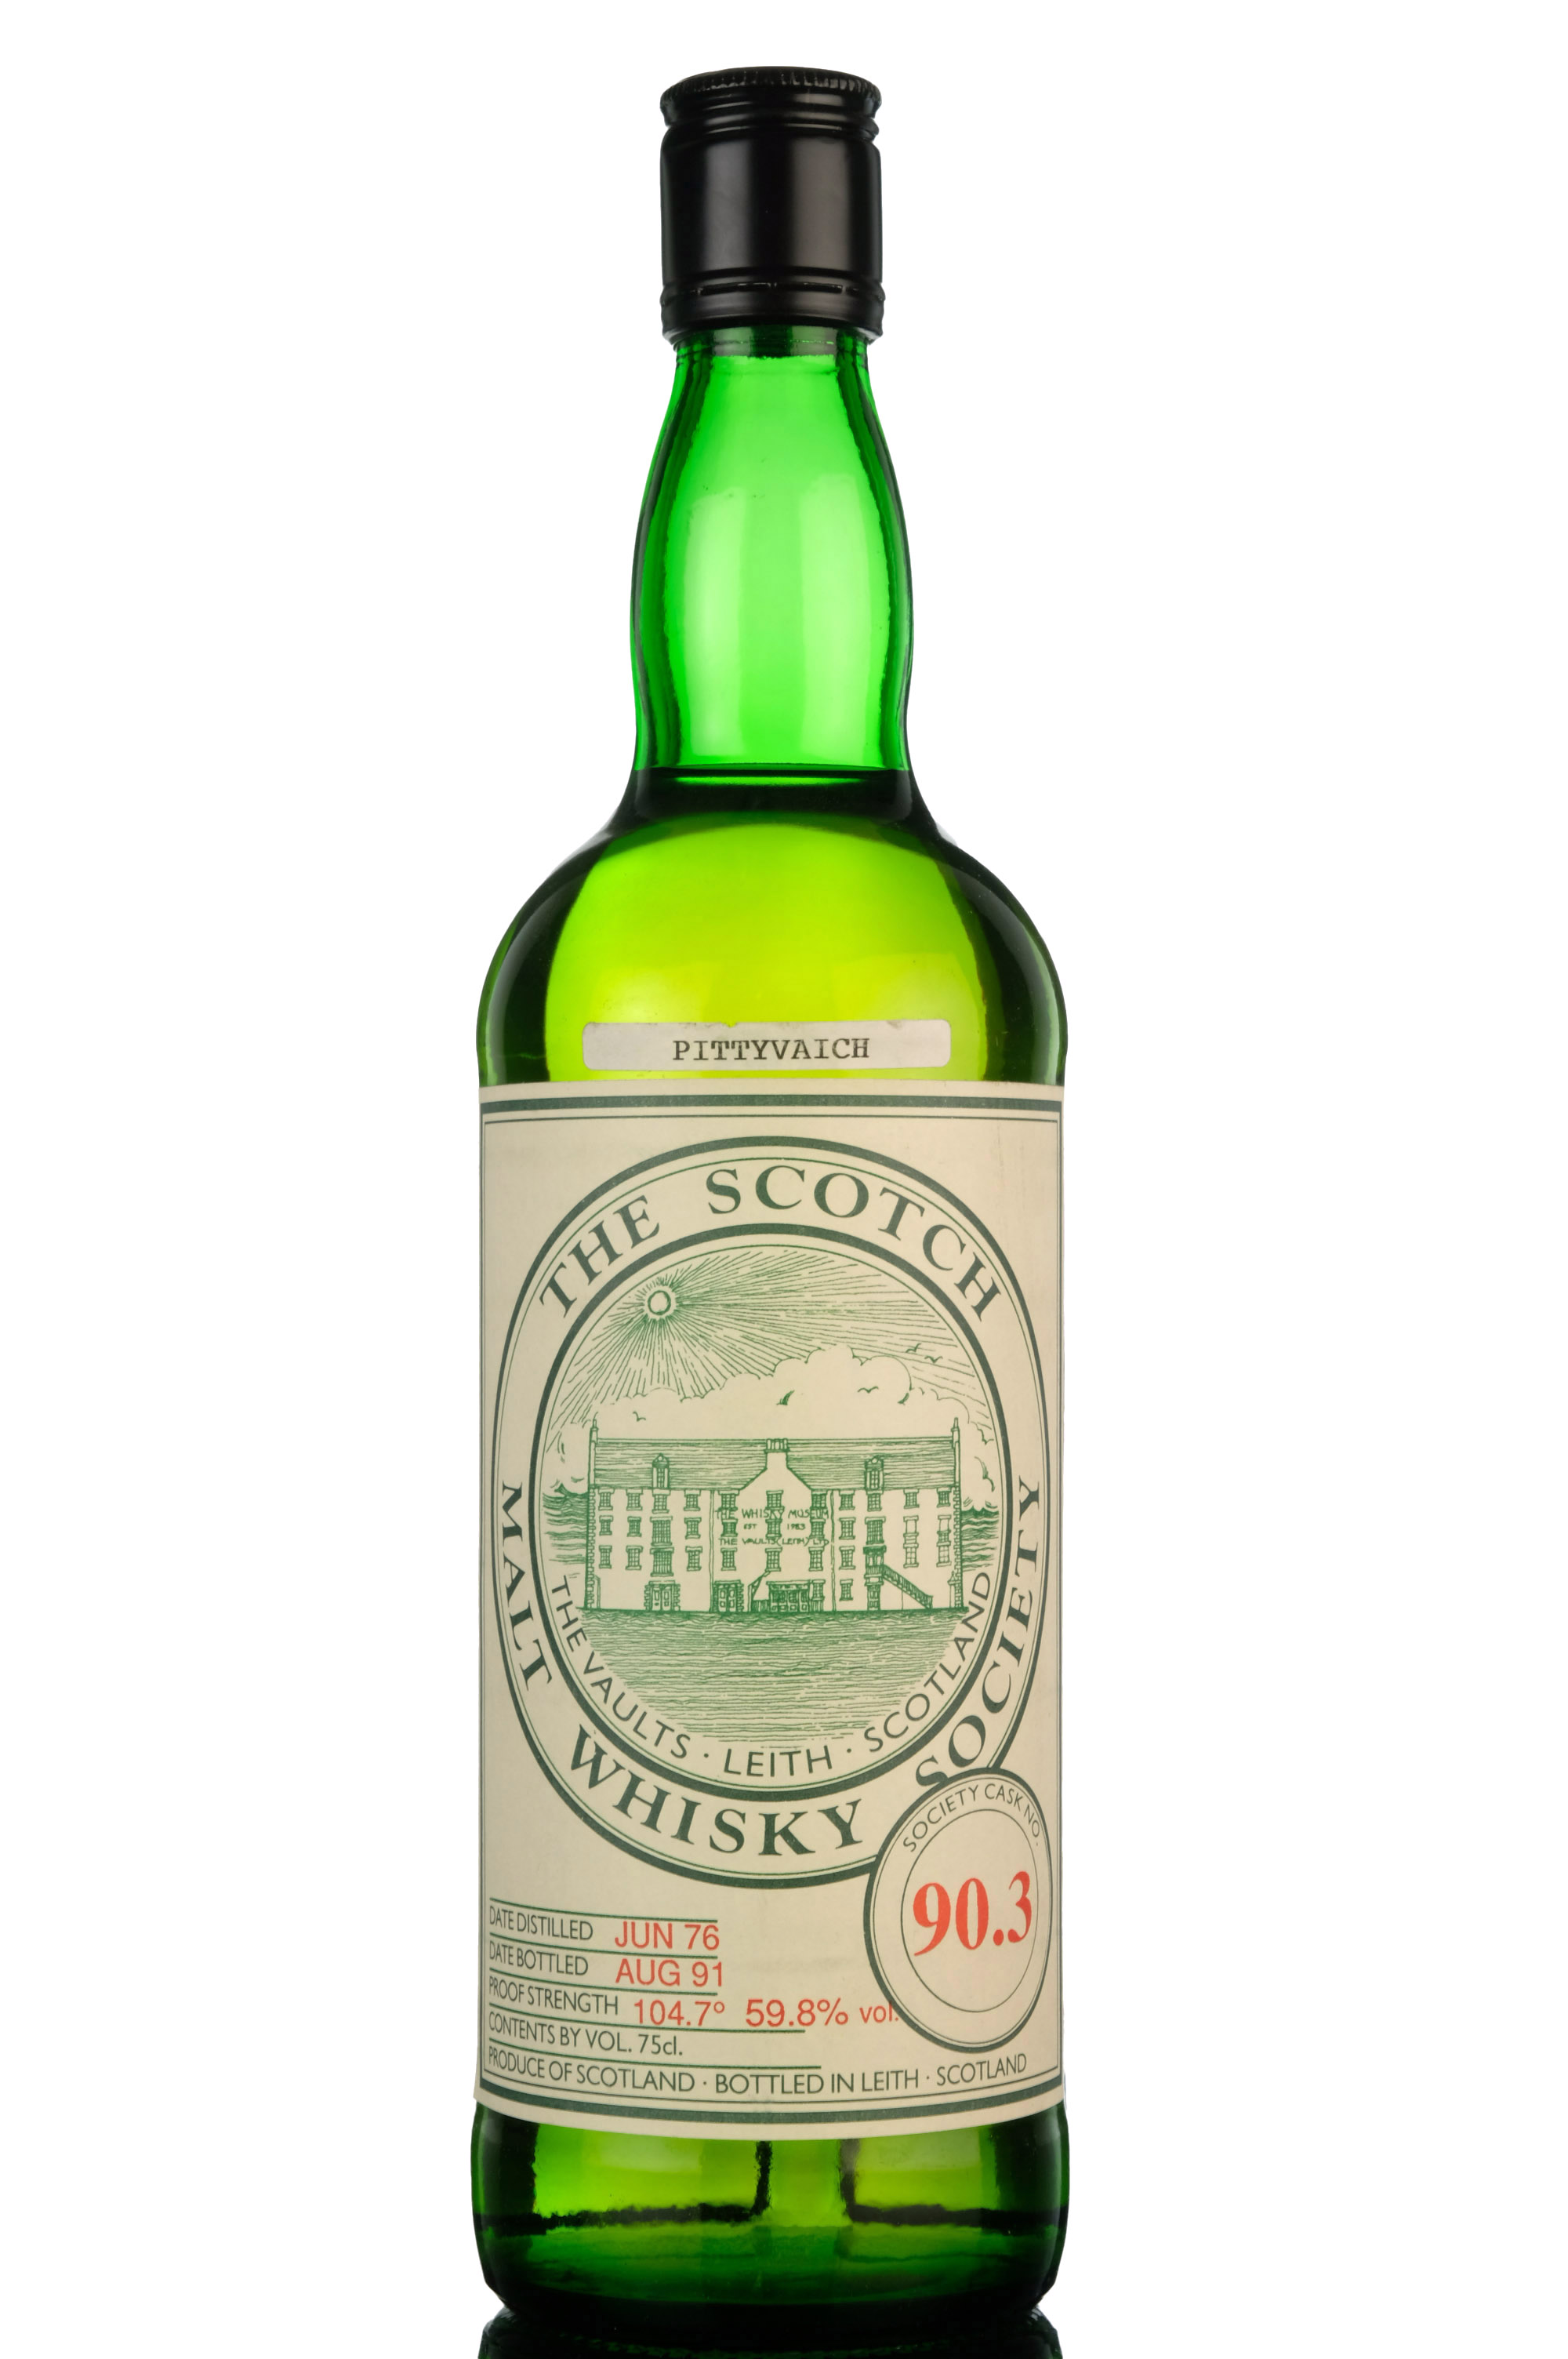 Pittyvaich 1976-1991 - 15 Year Old - SMWS 90.3 - Dry, lingering Aftertaste